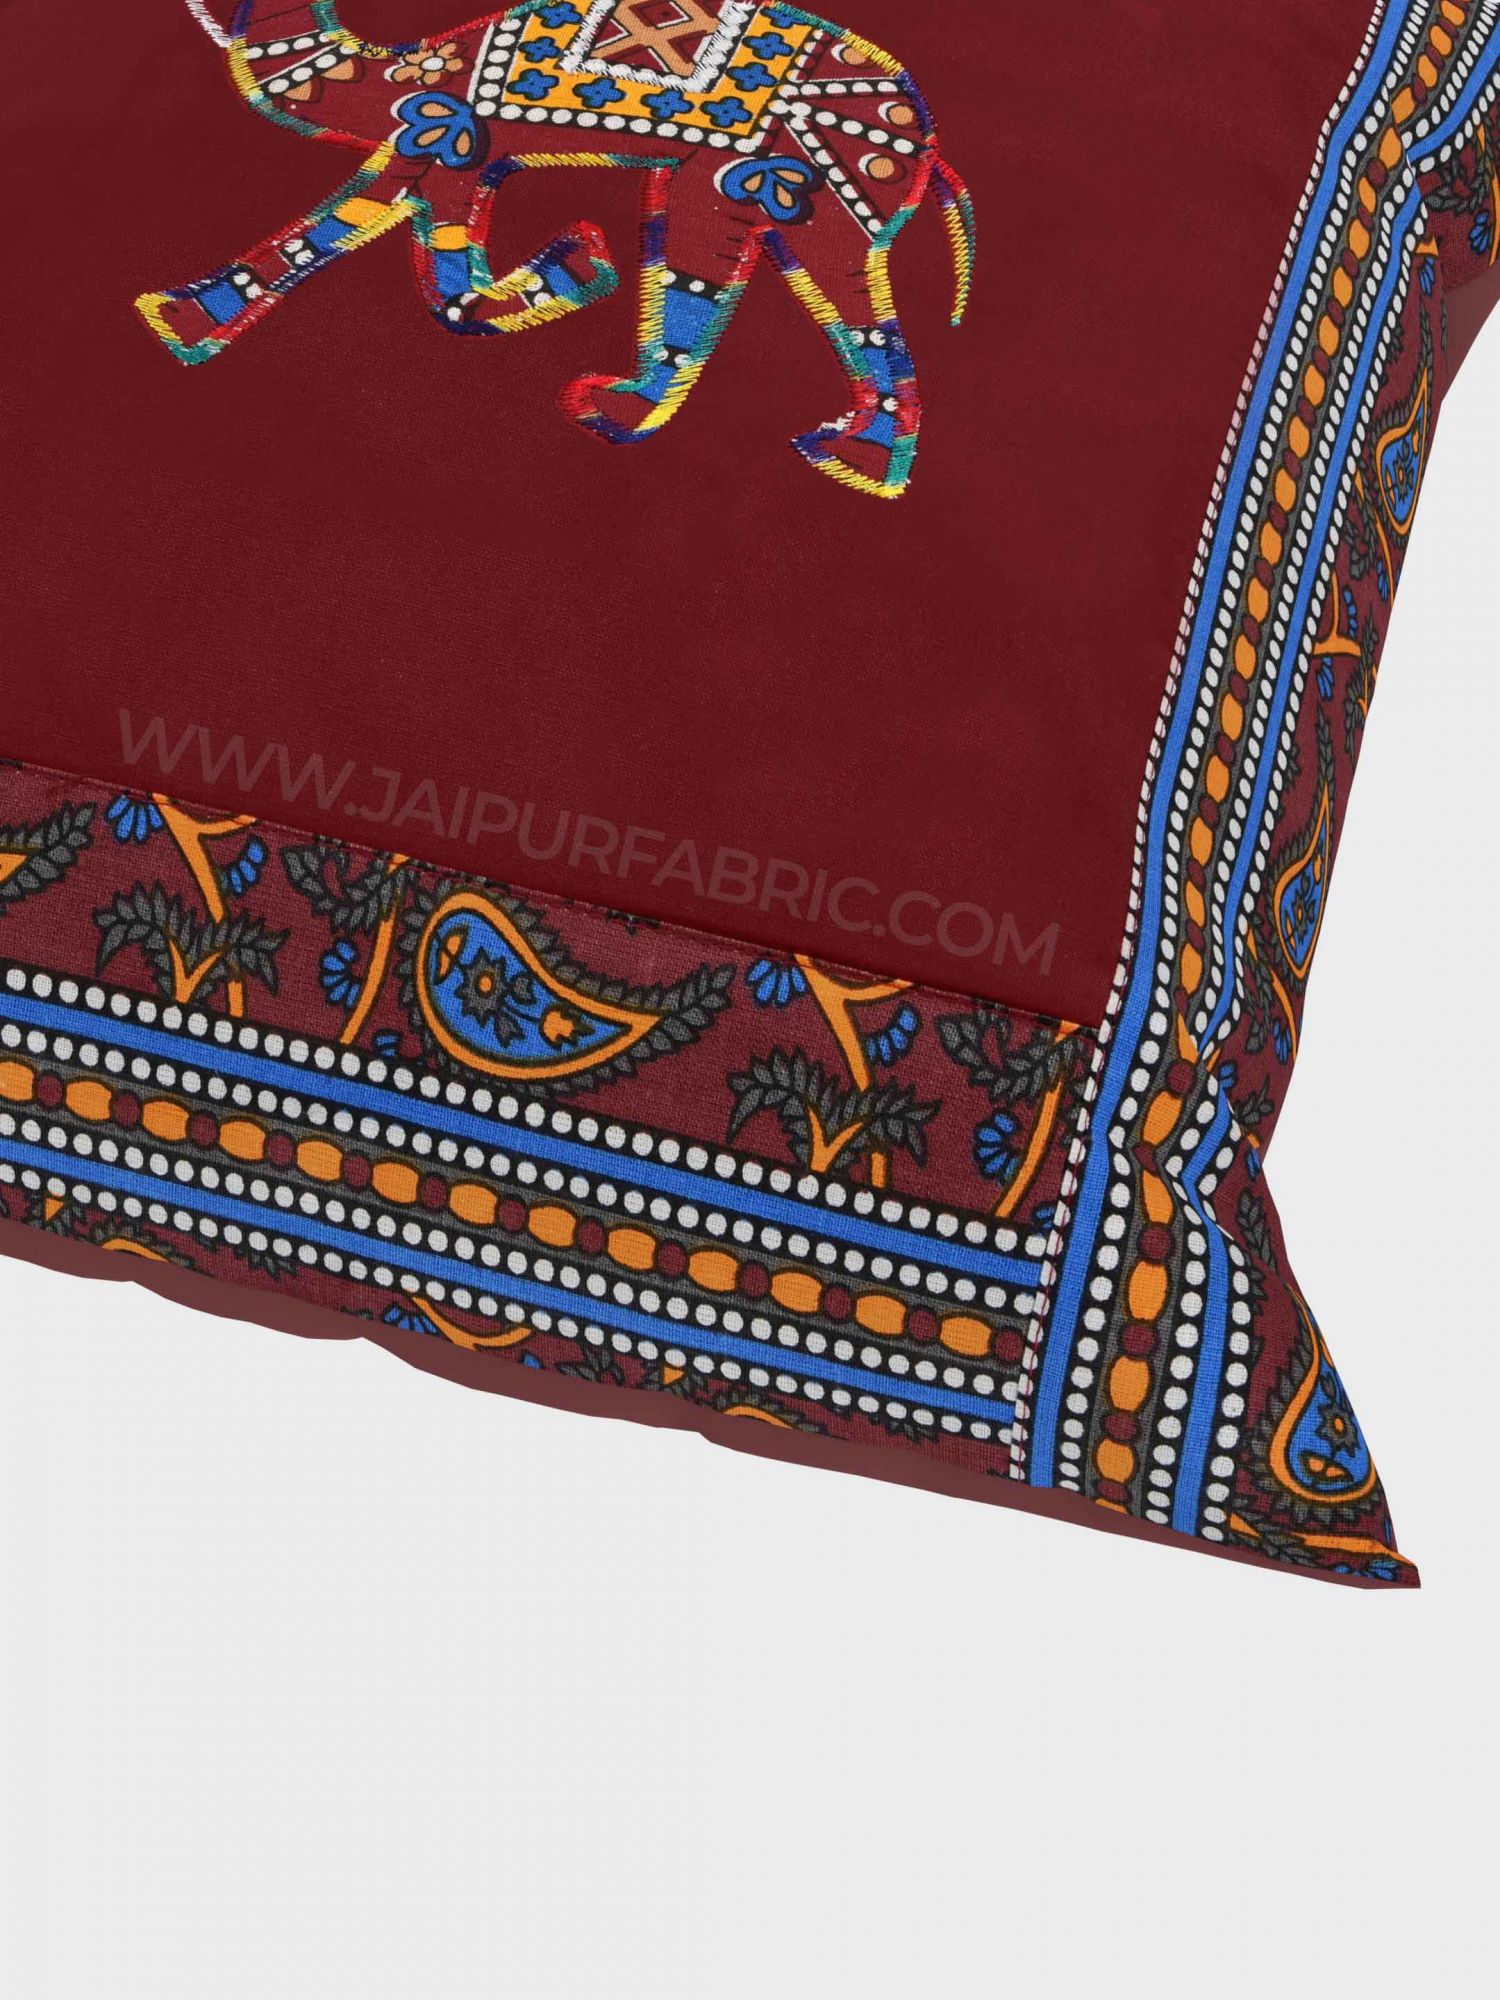 Applique Maroon Camel Jaipuri Hand Made Embroidery Patch Work Cushion Cover